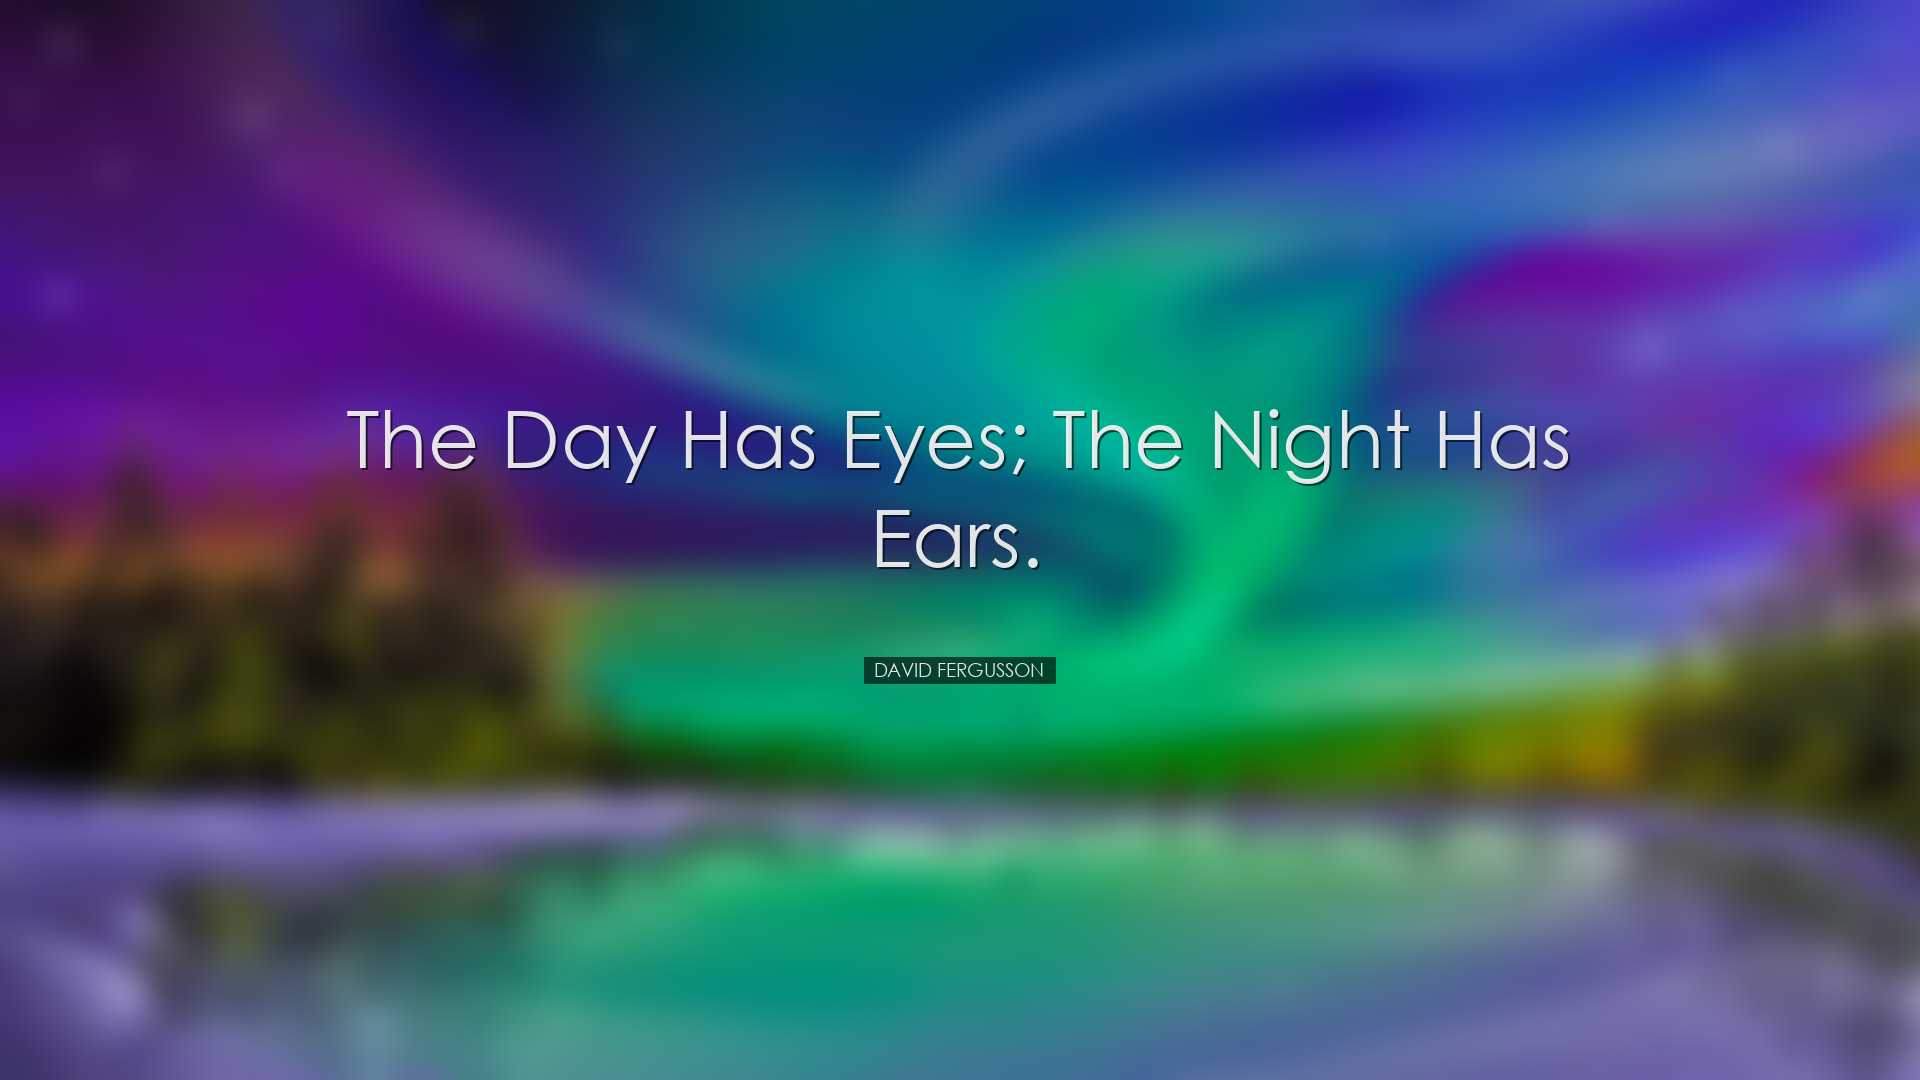 The day has eyes; the night has ears. - David Fergusson